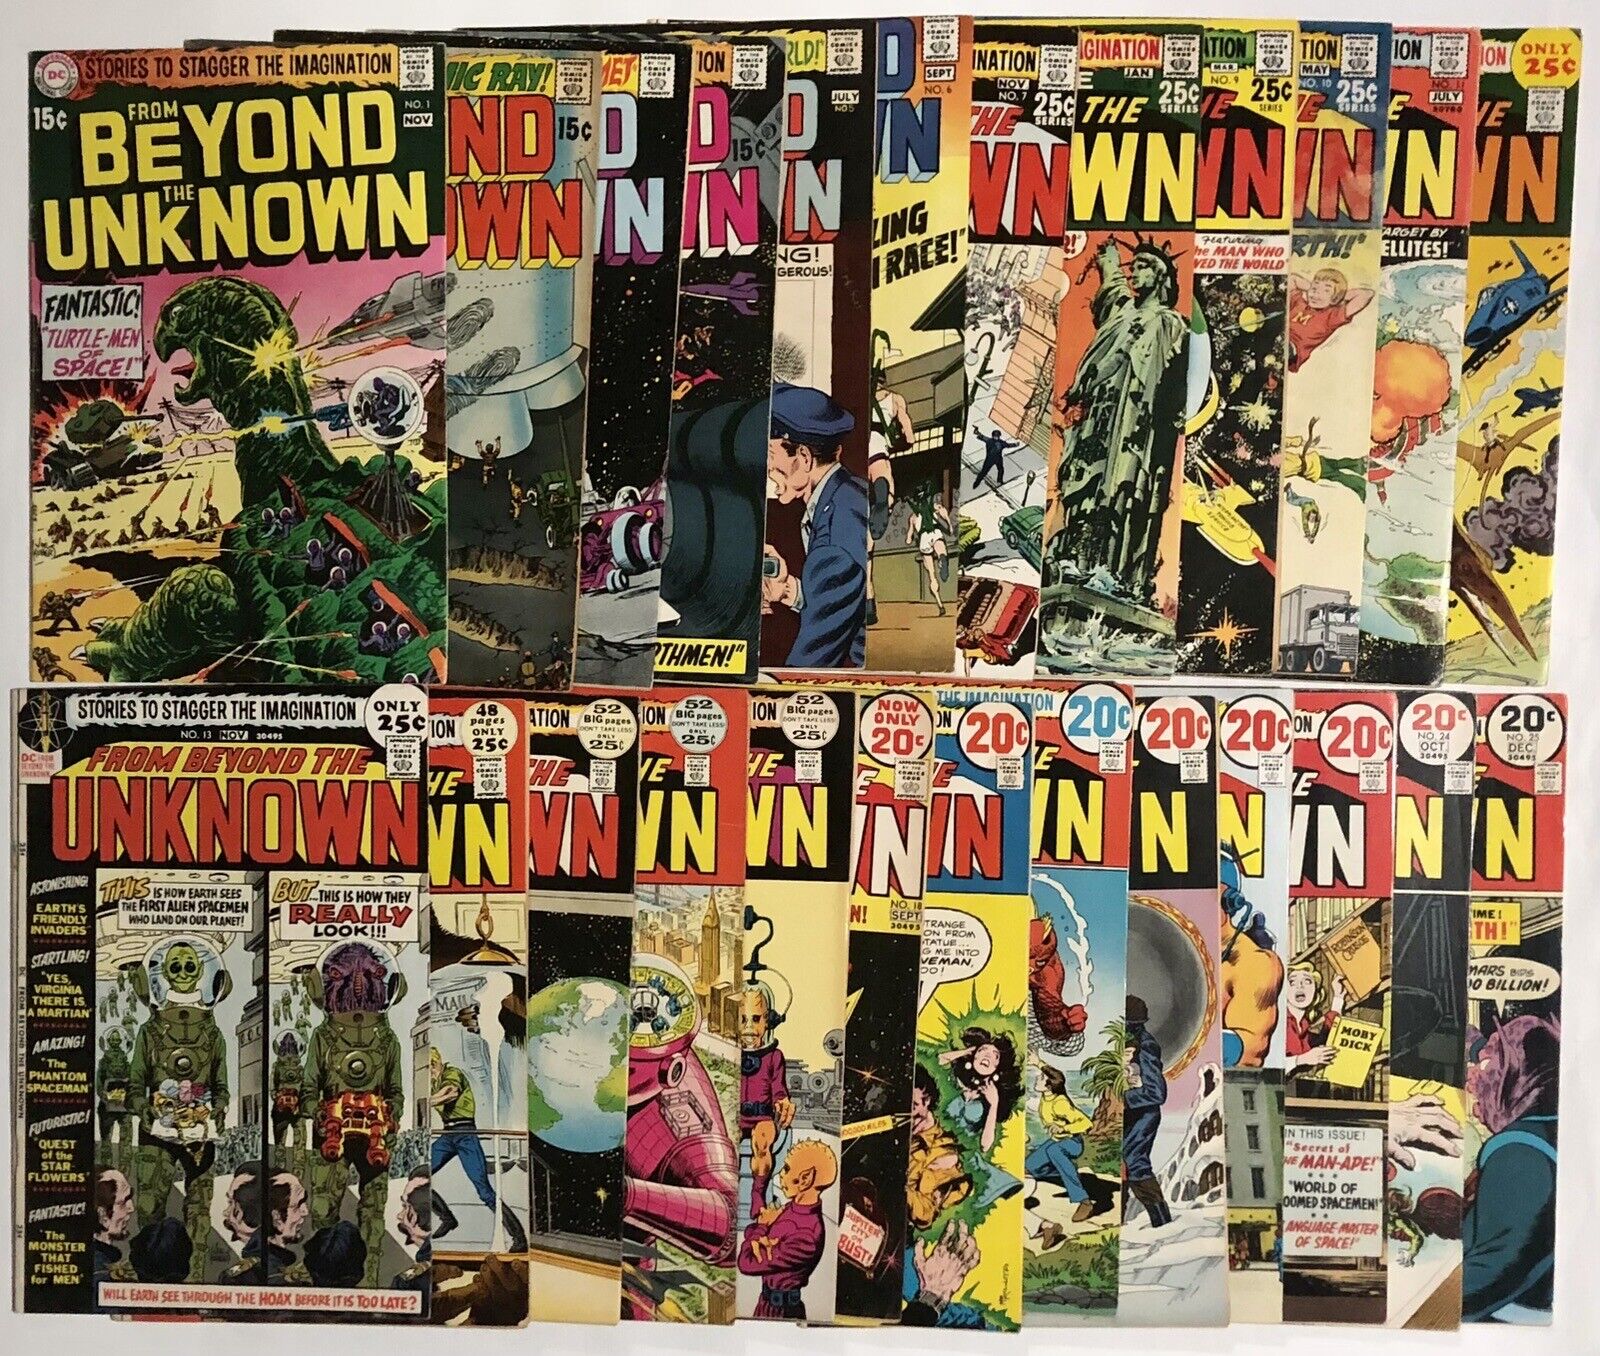 FROM BEYOND THE UNKNOWN #1-#25 Full Series DC Comics Lot Mid Grade Set 1969-1973